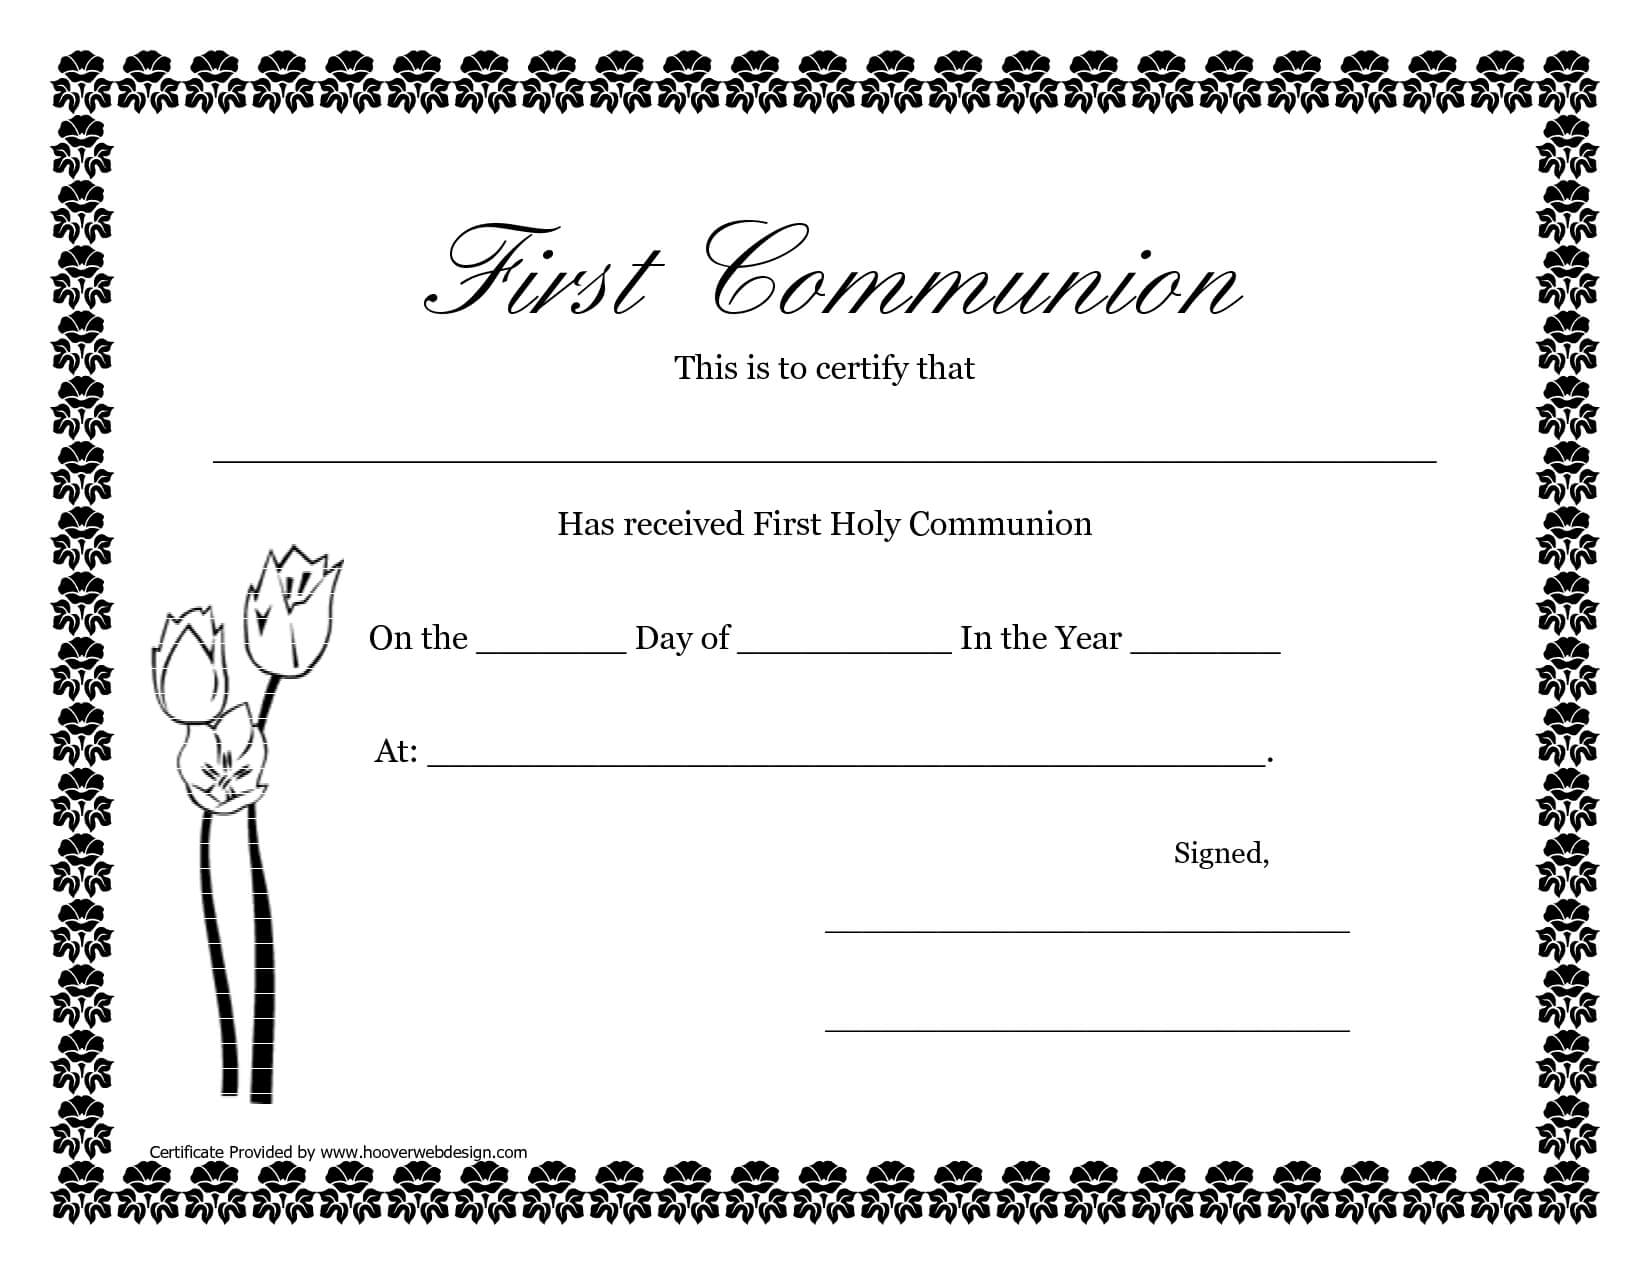 First Communion Banner Templates | Printable First Communion Intended For First Holy Communion Banner Templates